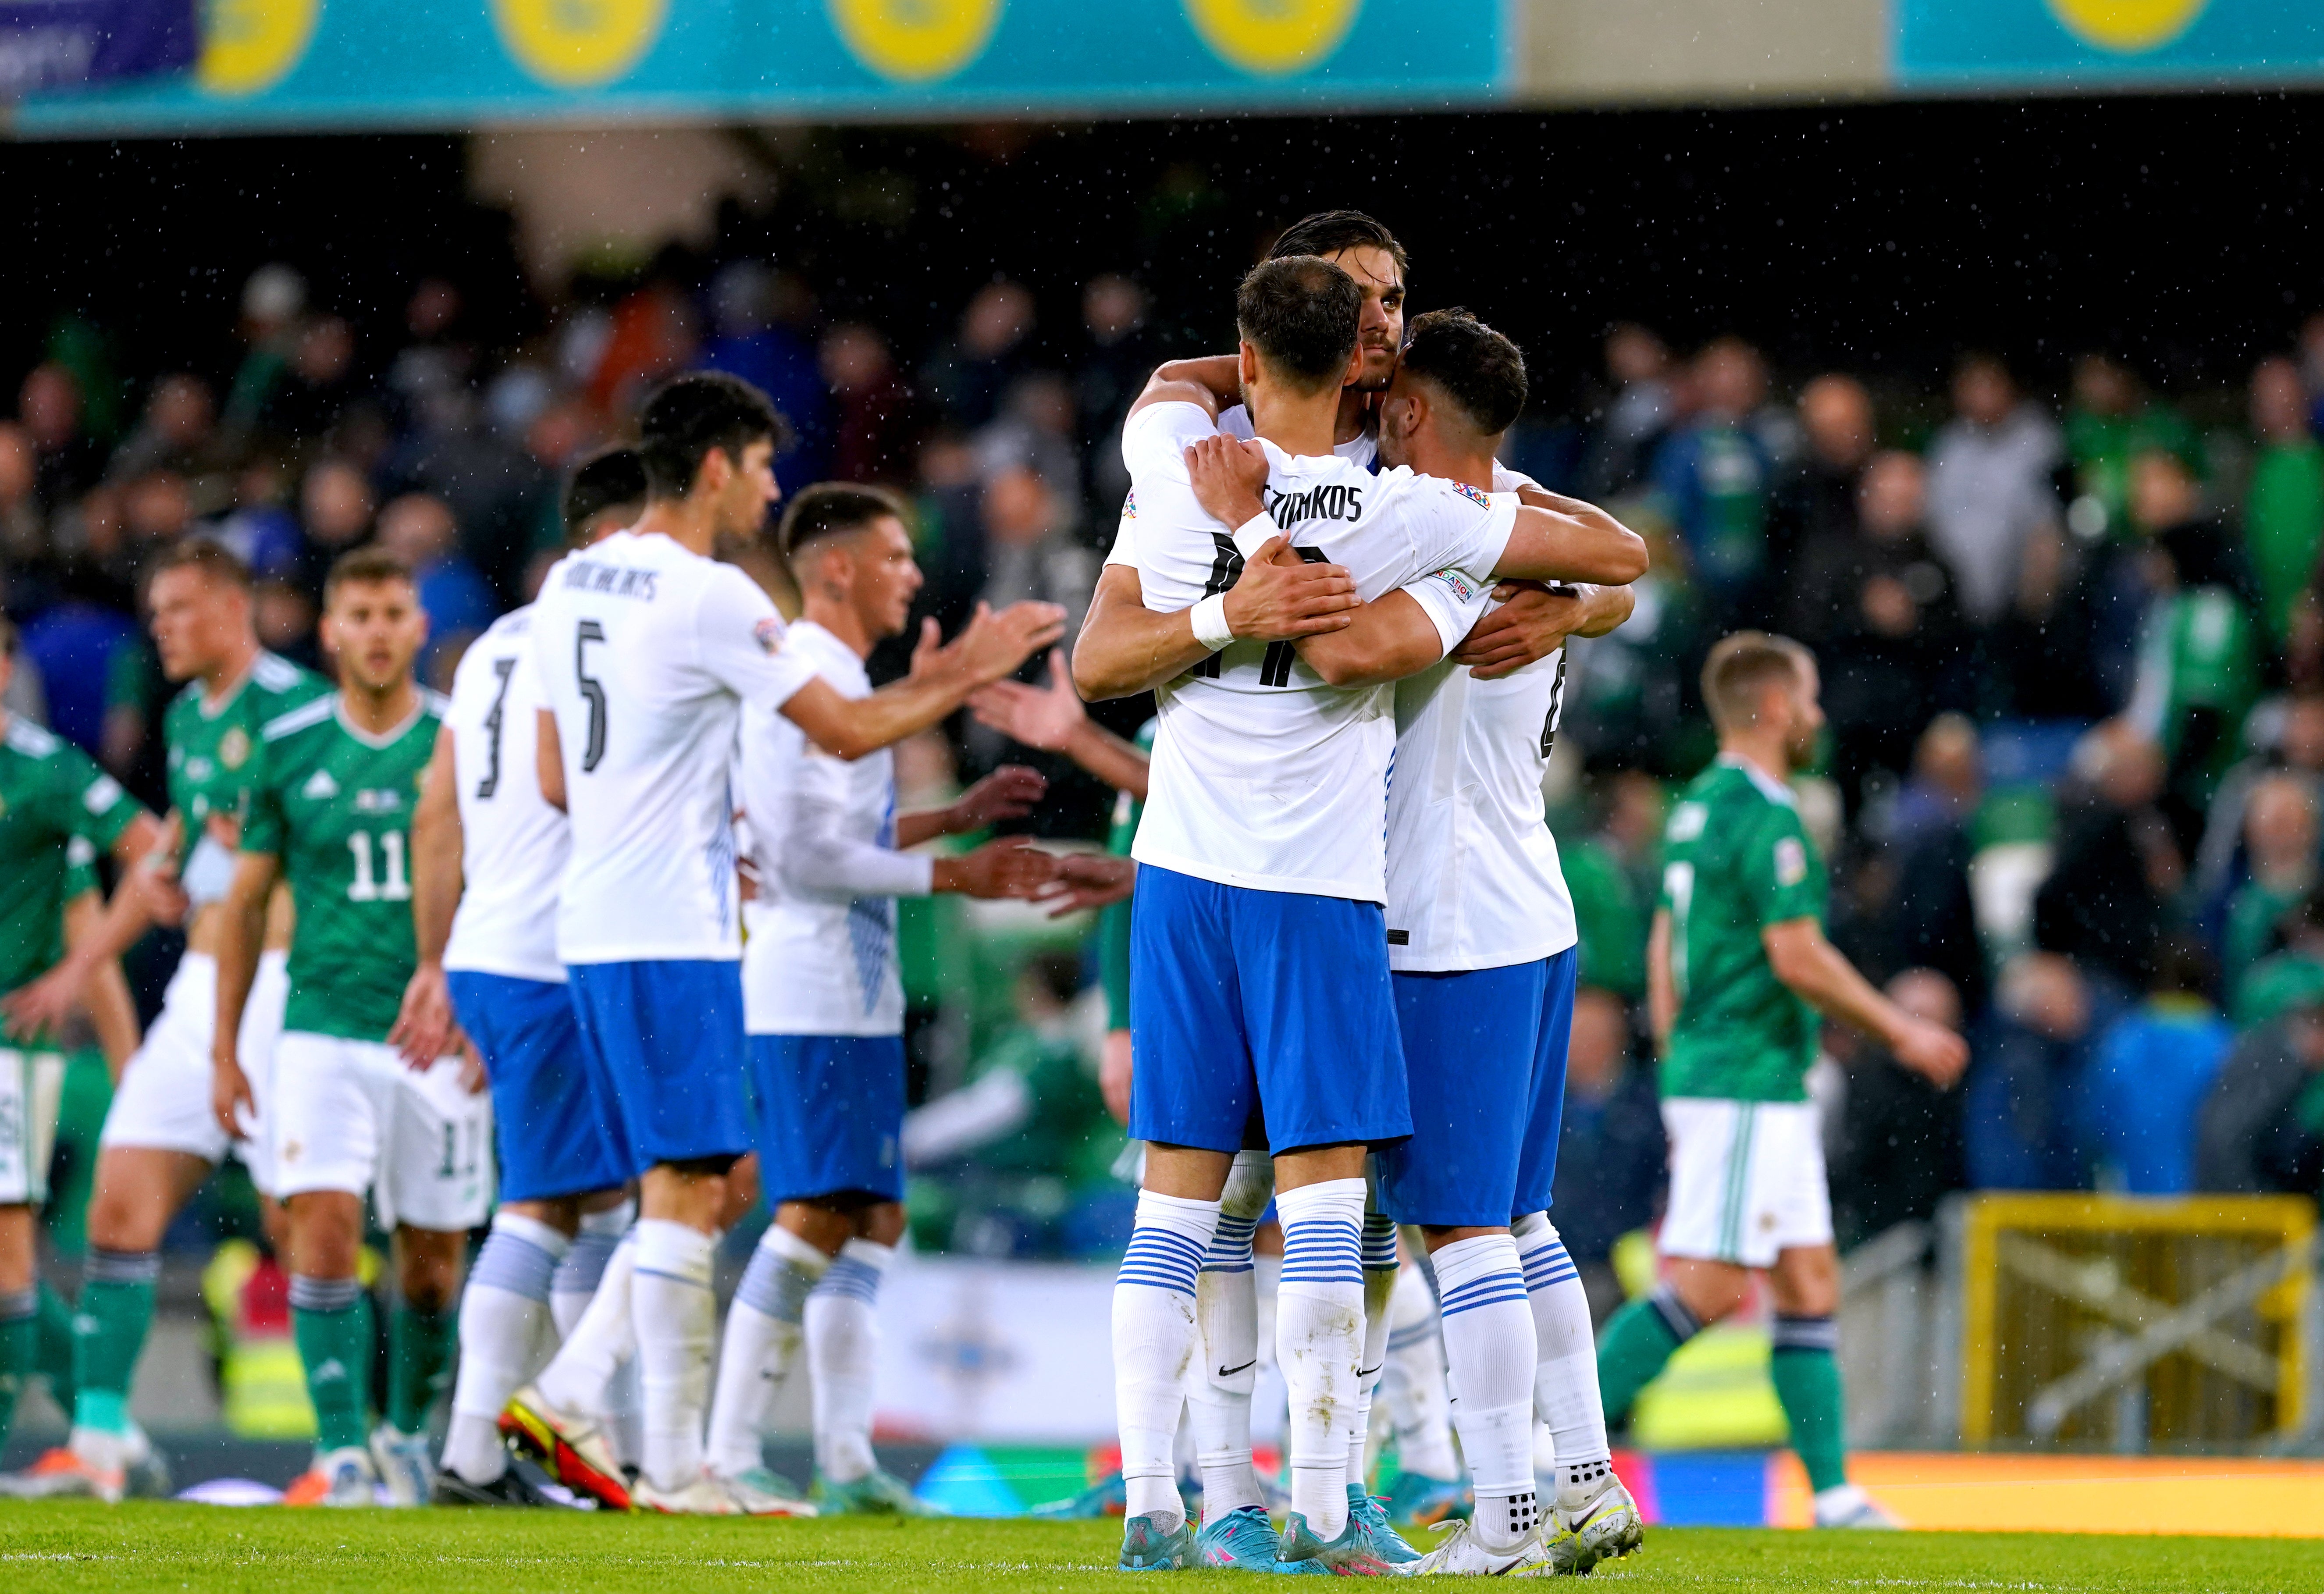 Northern Ireland lost to Greece in their first Nations League group fixture